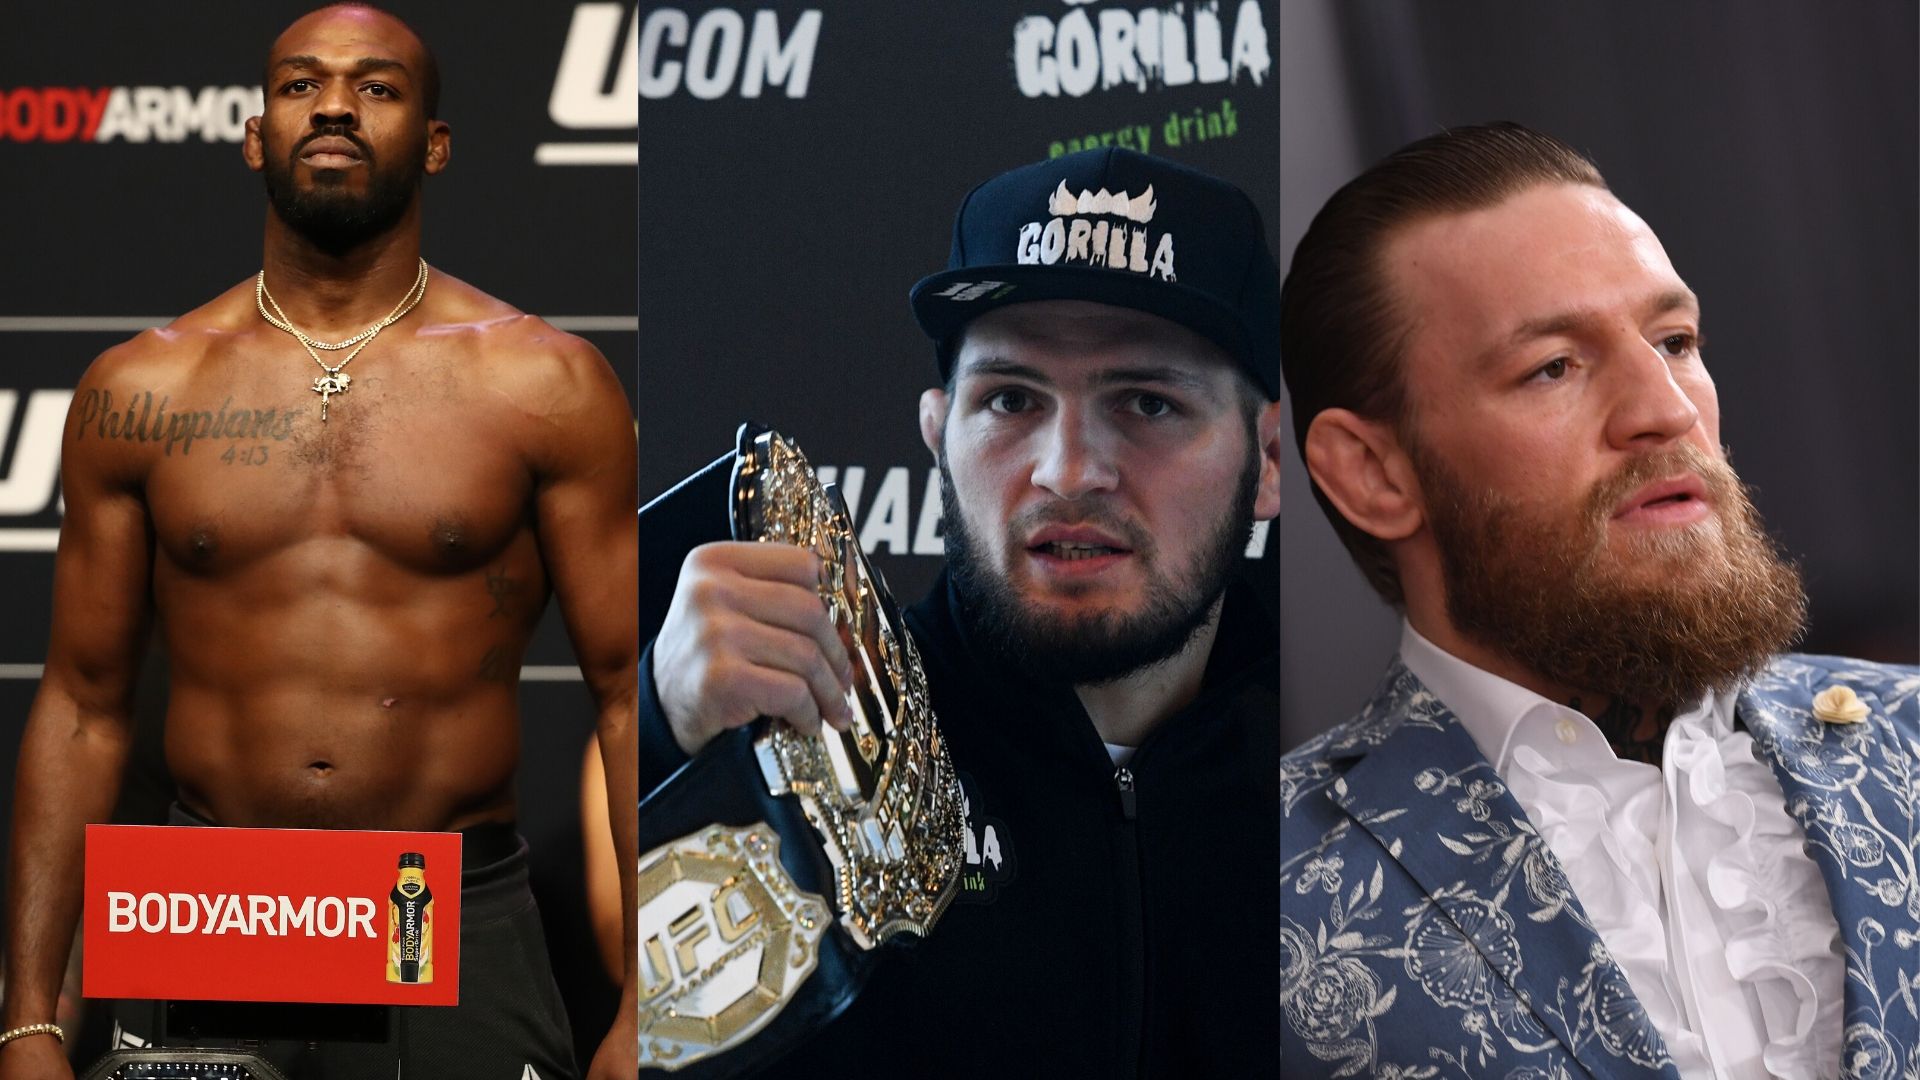 Jon Jones, Conor McGregor and Khabib Nurmagomedov are some of the highest paid UFC fighters in 2020 thanks to their prize money